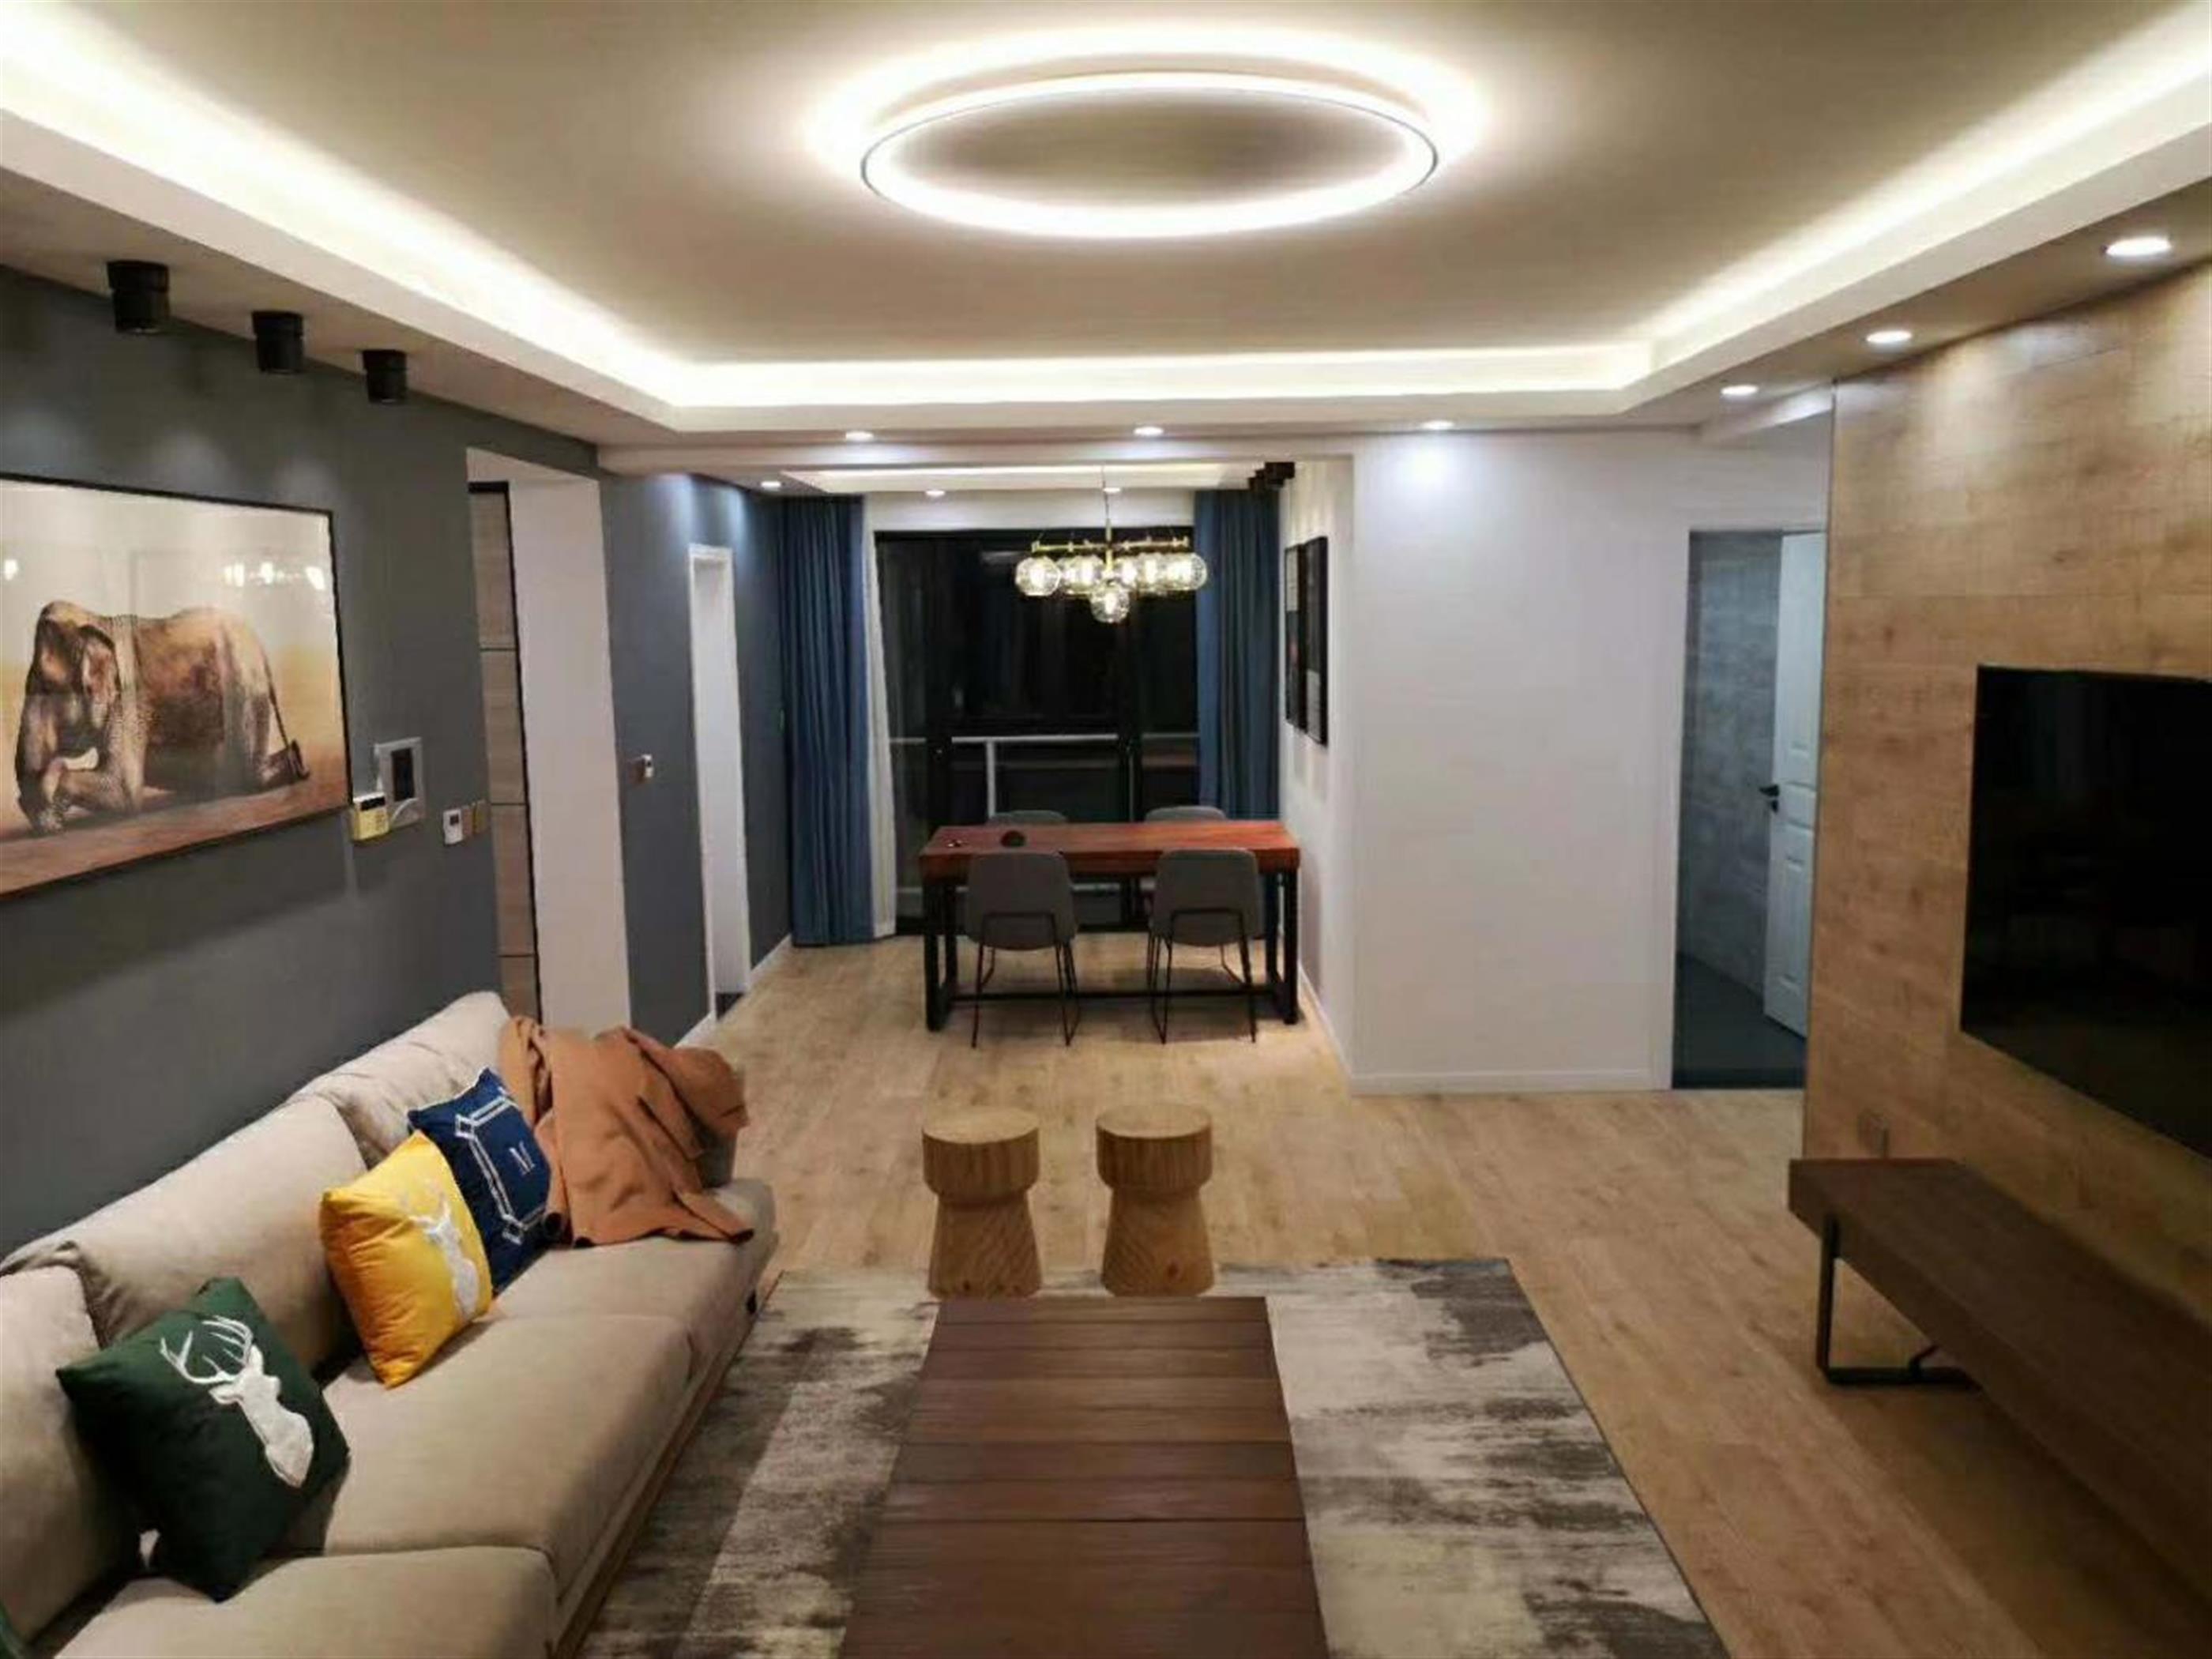 Pretty decor Newly Furnished, Modern, Spacious Jing’an 4BR Apt nr LN 1/2/8/13 in Shanghai for Rent